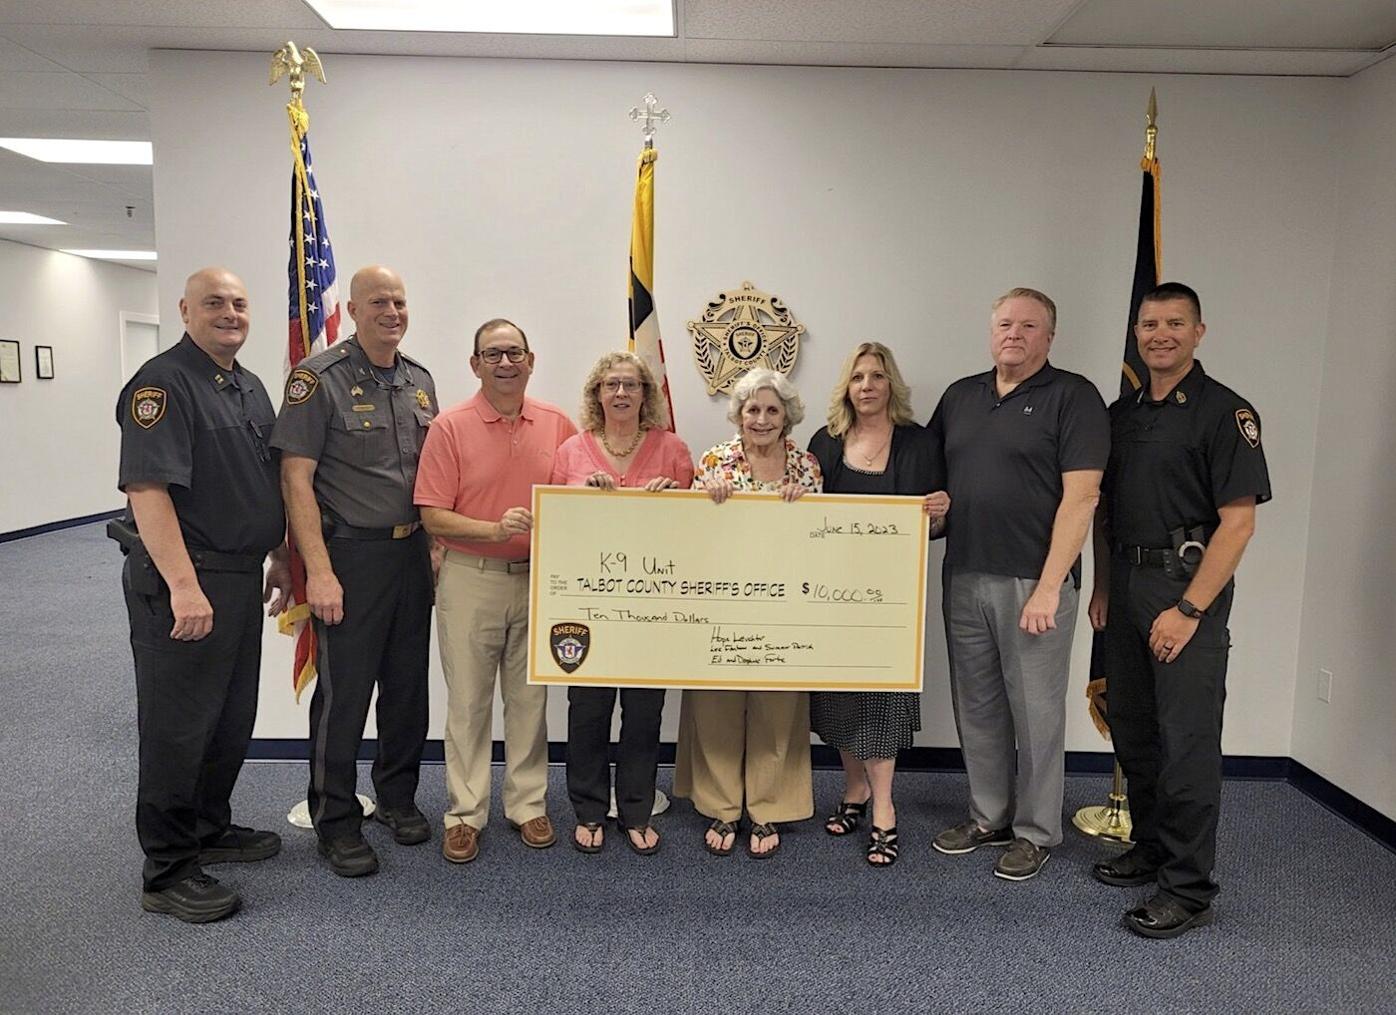 Family gives Talbot County Sheriff's Office donation toward new K-9, Local